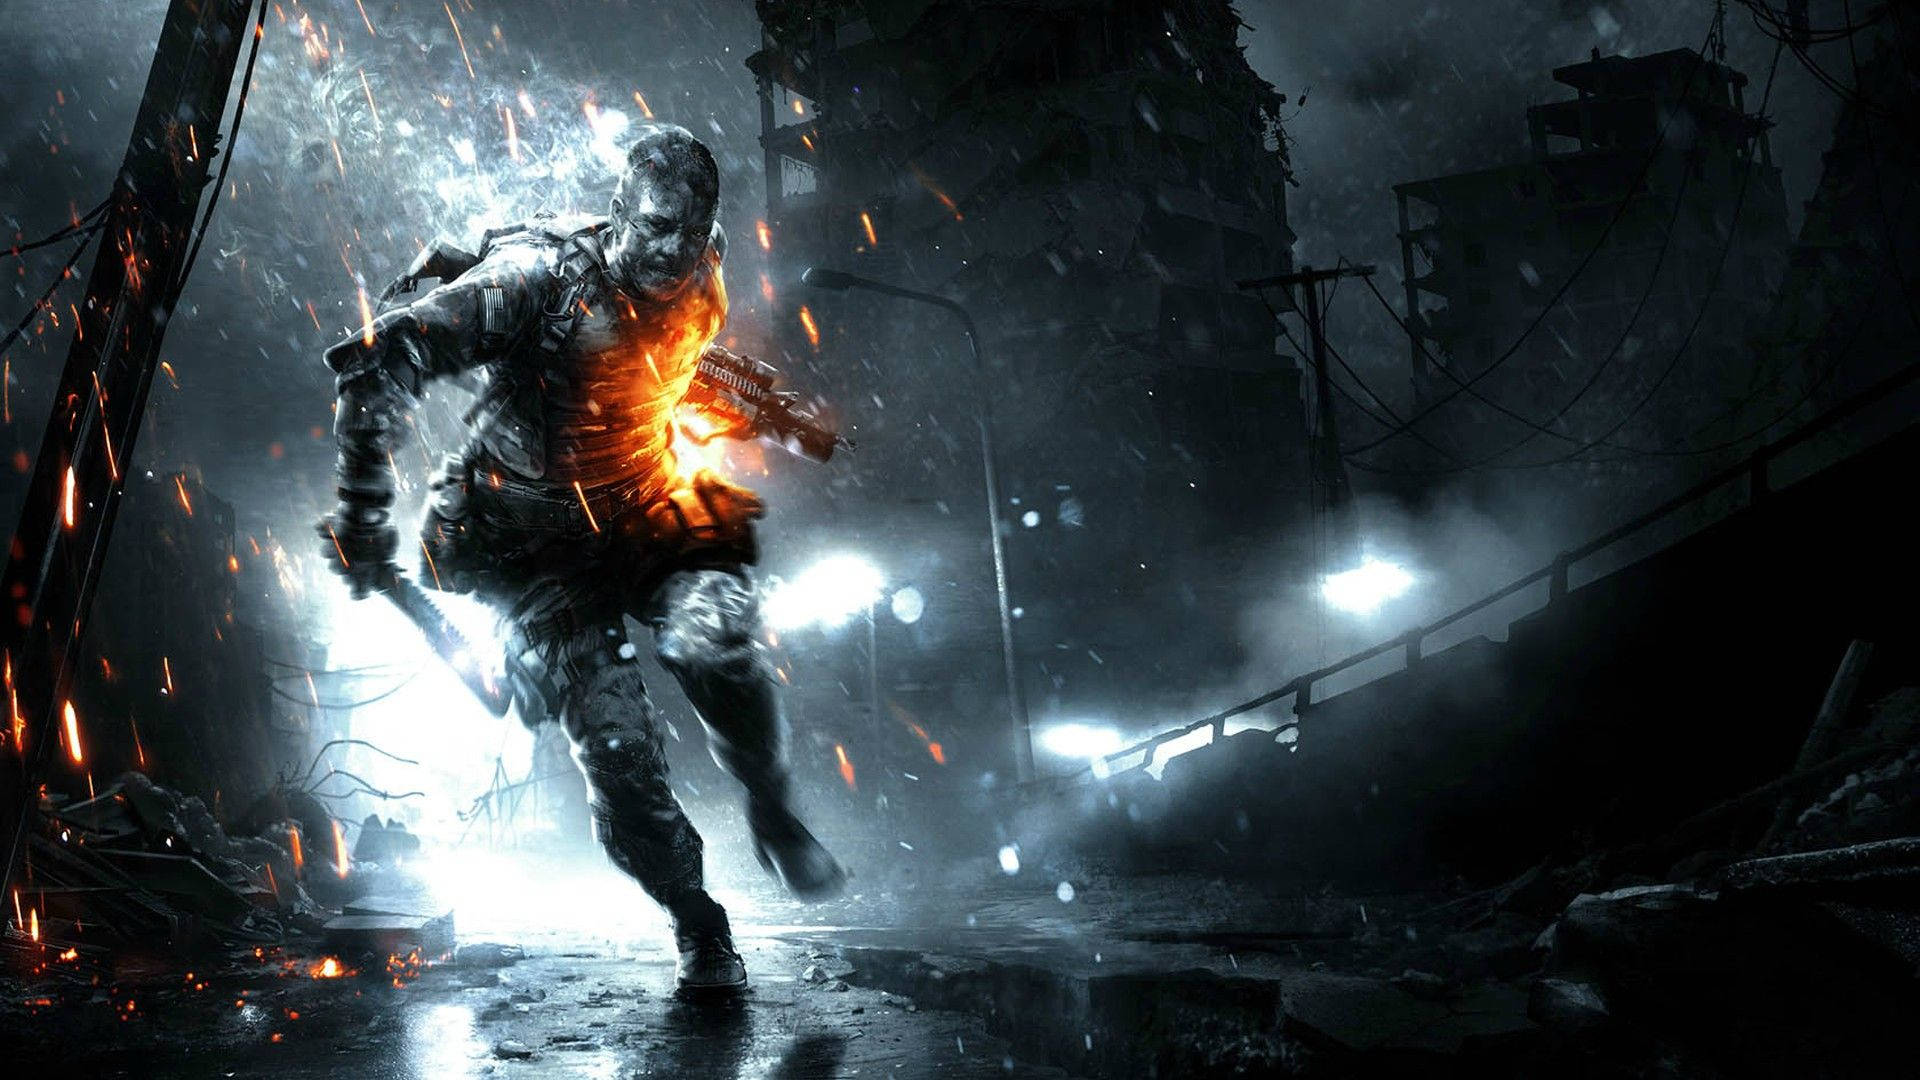 Hd Cool Battlefield Gaming Cover Background